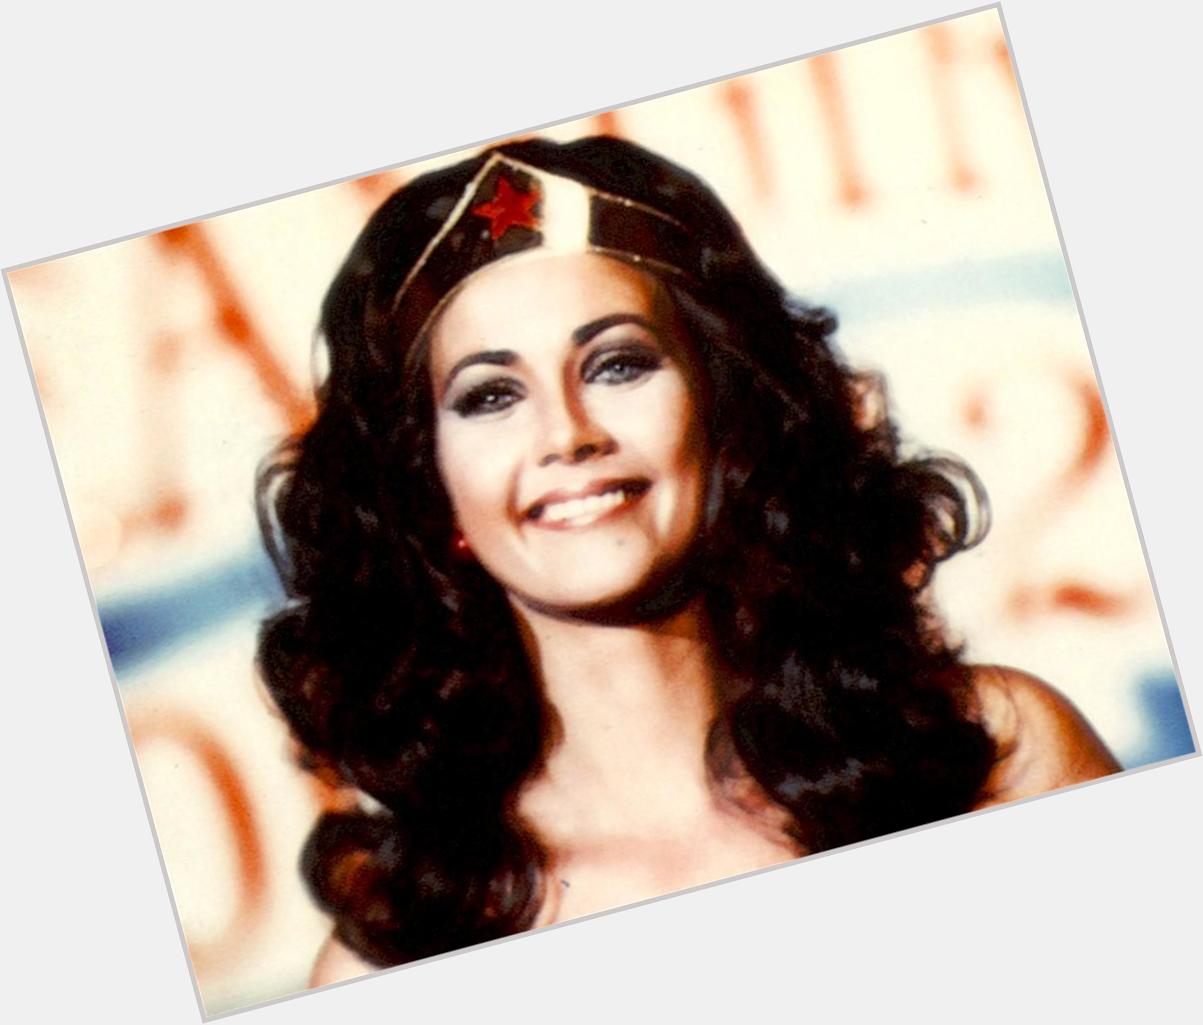 Just in case you missed it - Lynda Carter aka Wonder Woman had her birthday today. Happy Birthday, Your Wonderness! 